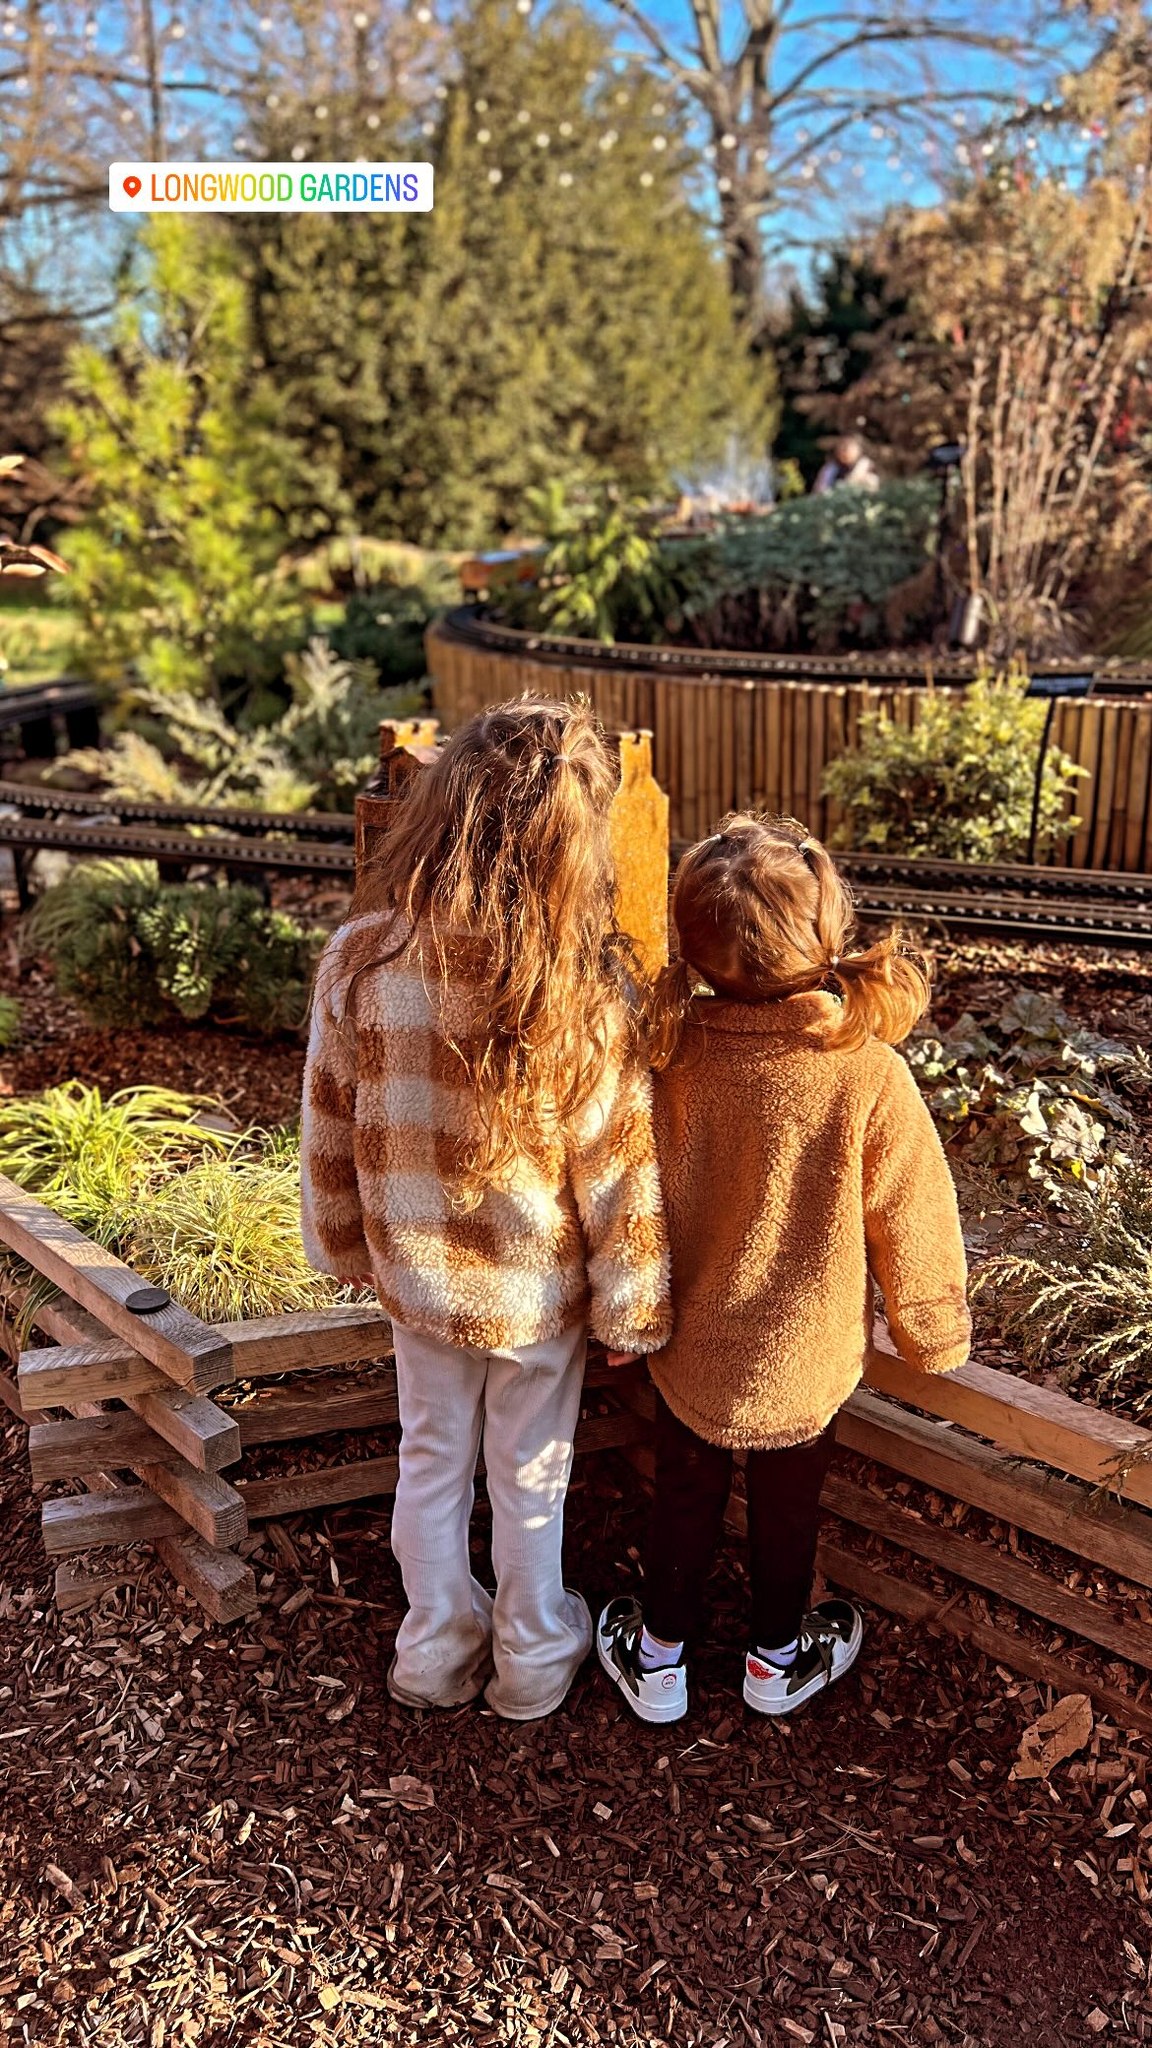 Jinger posted a rare photo of her two daughters